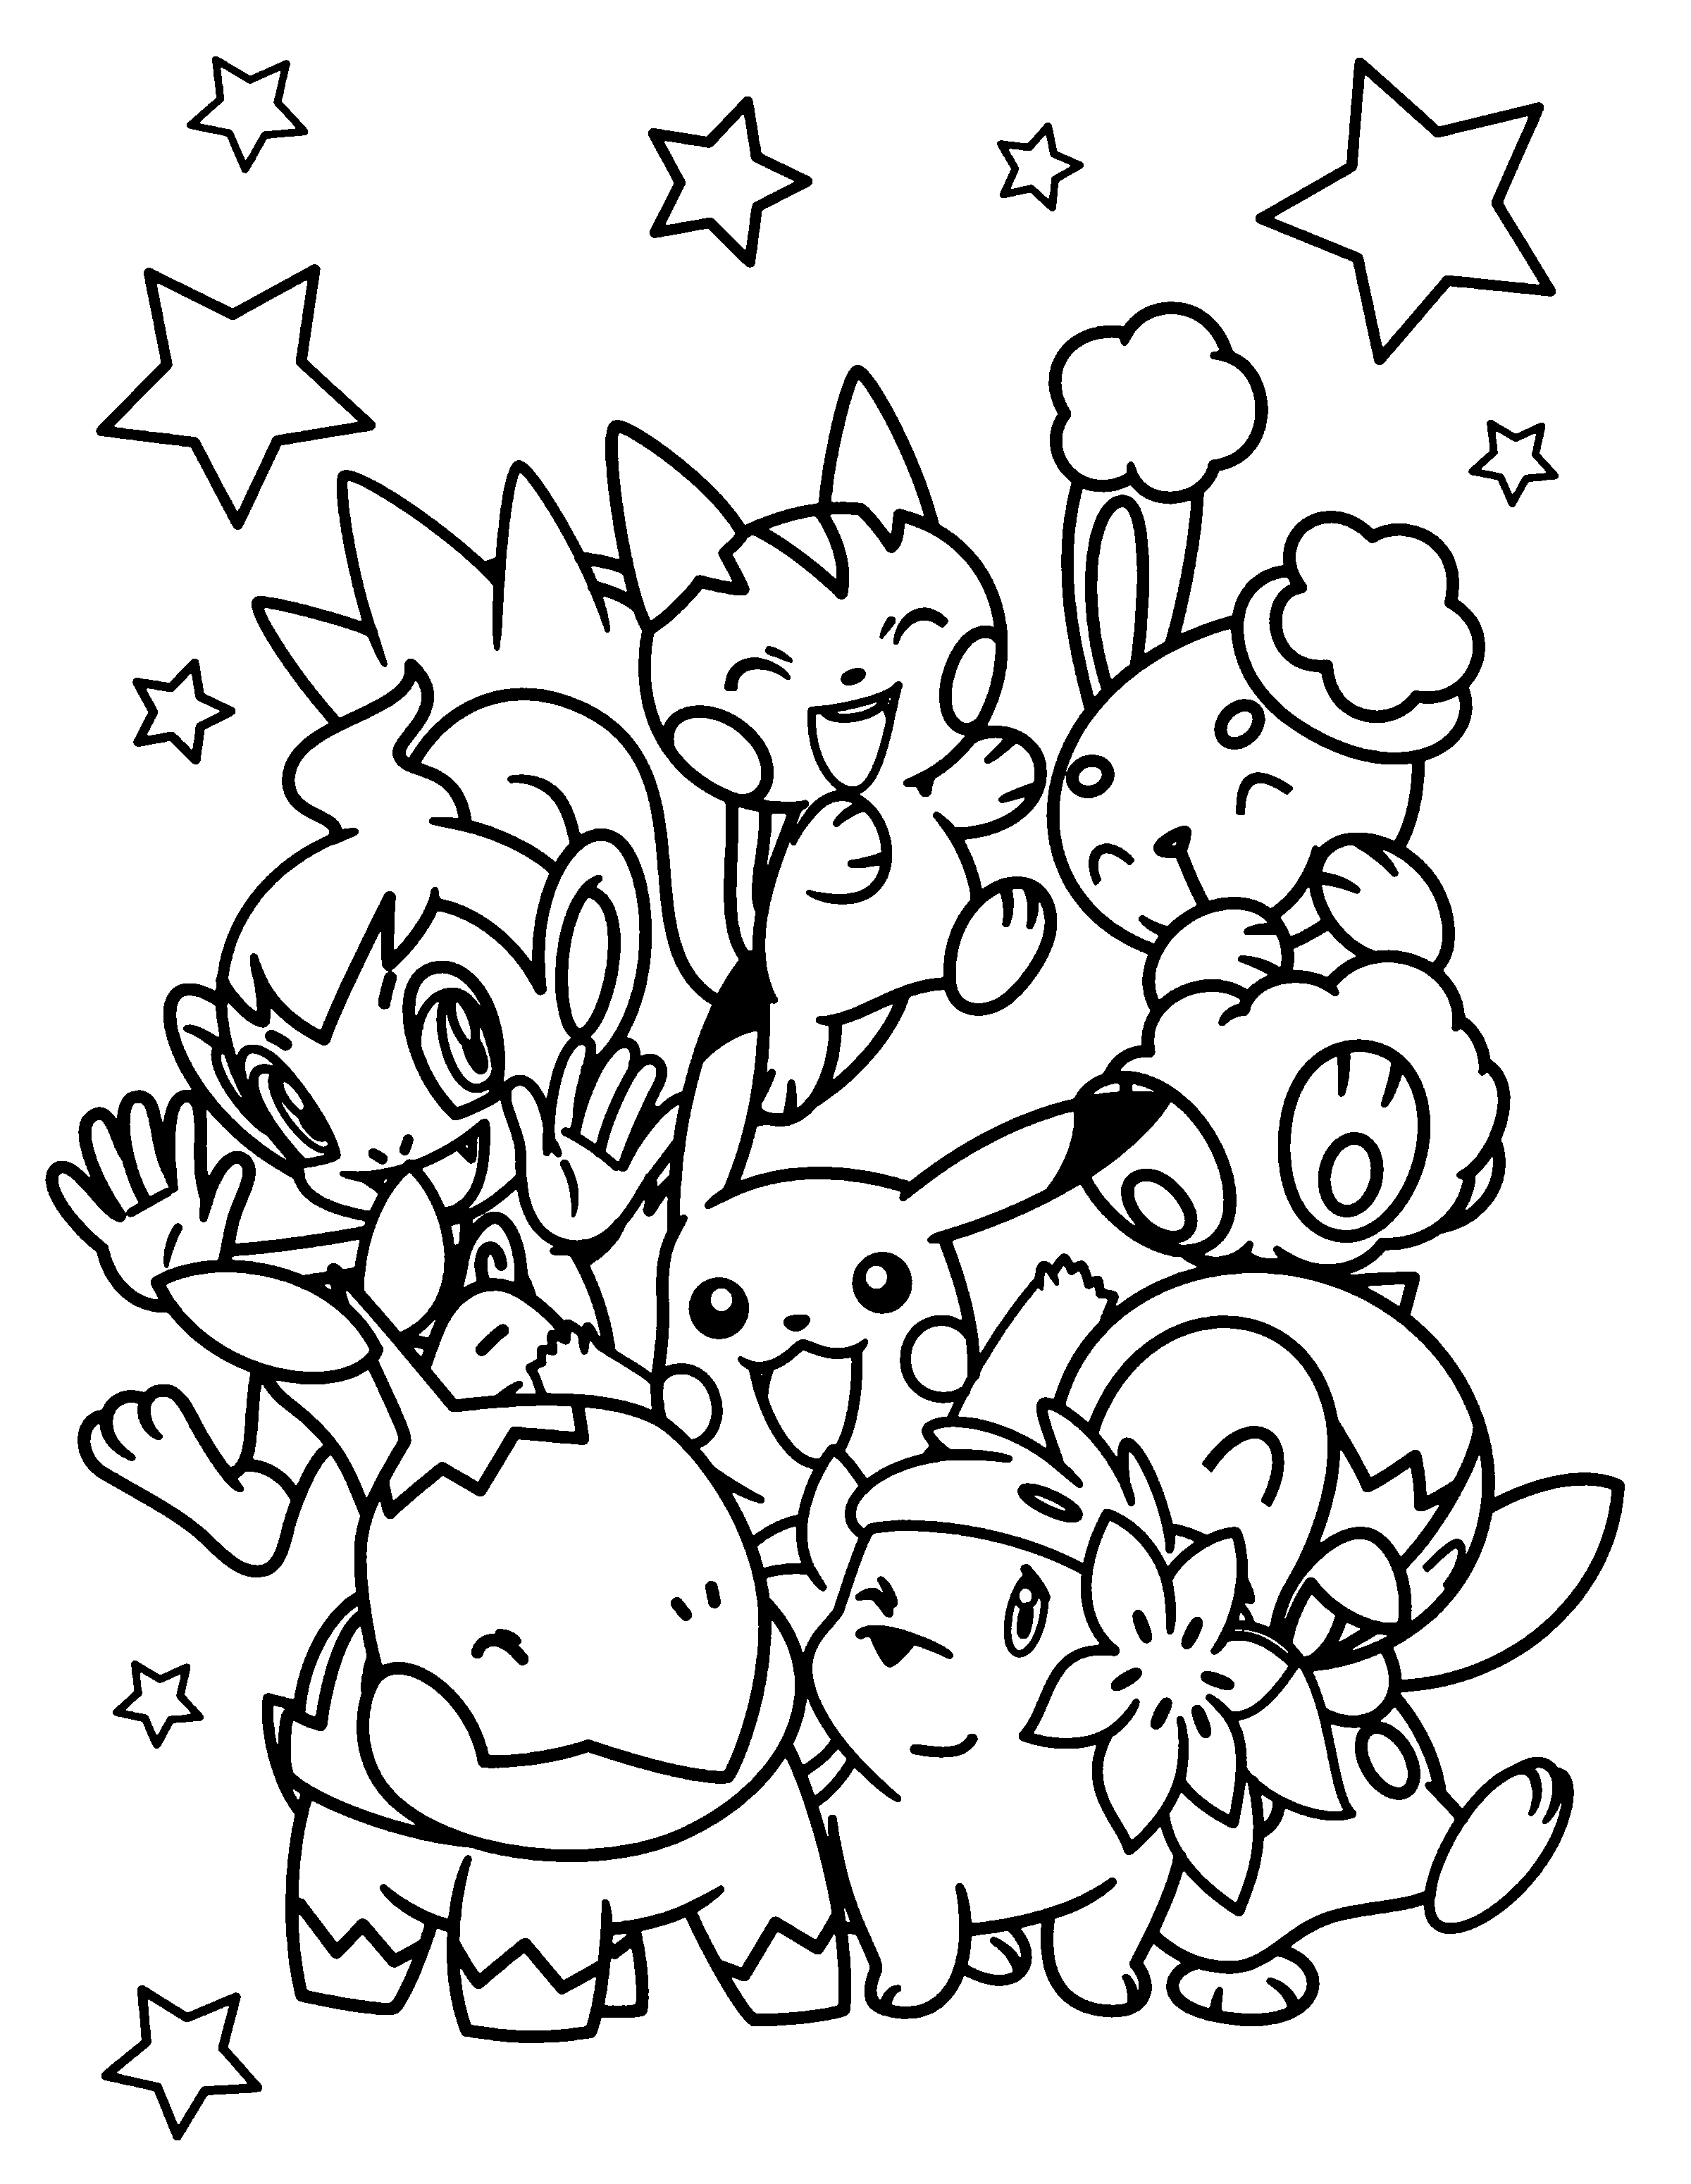 Incredible Pokemon coloring page to print and color for free